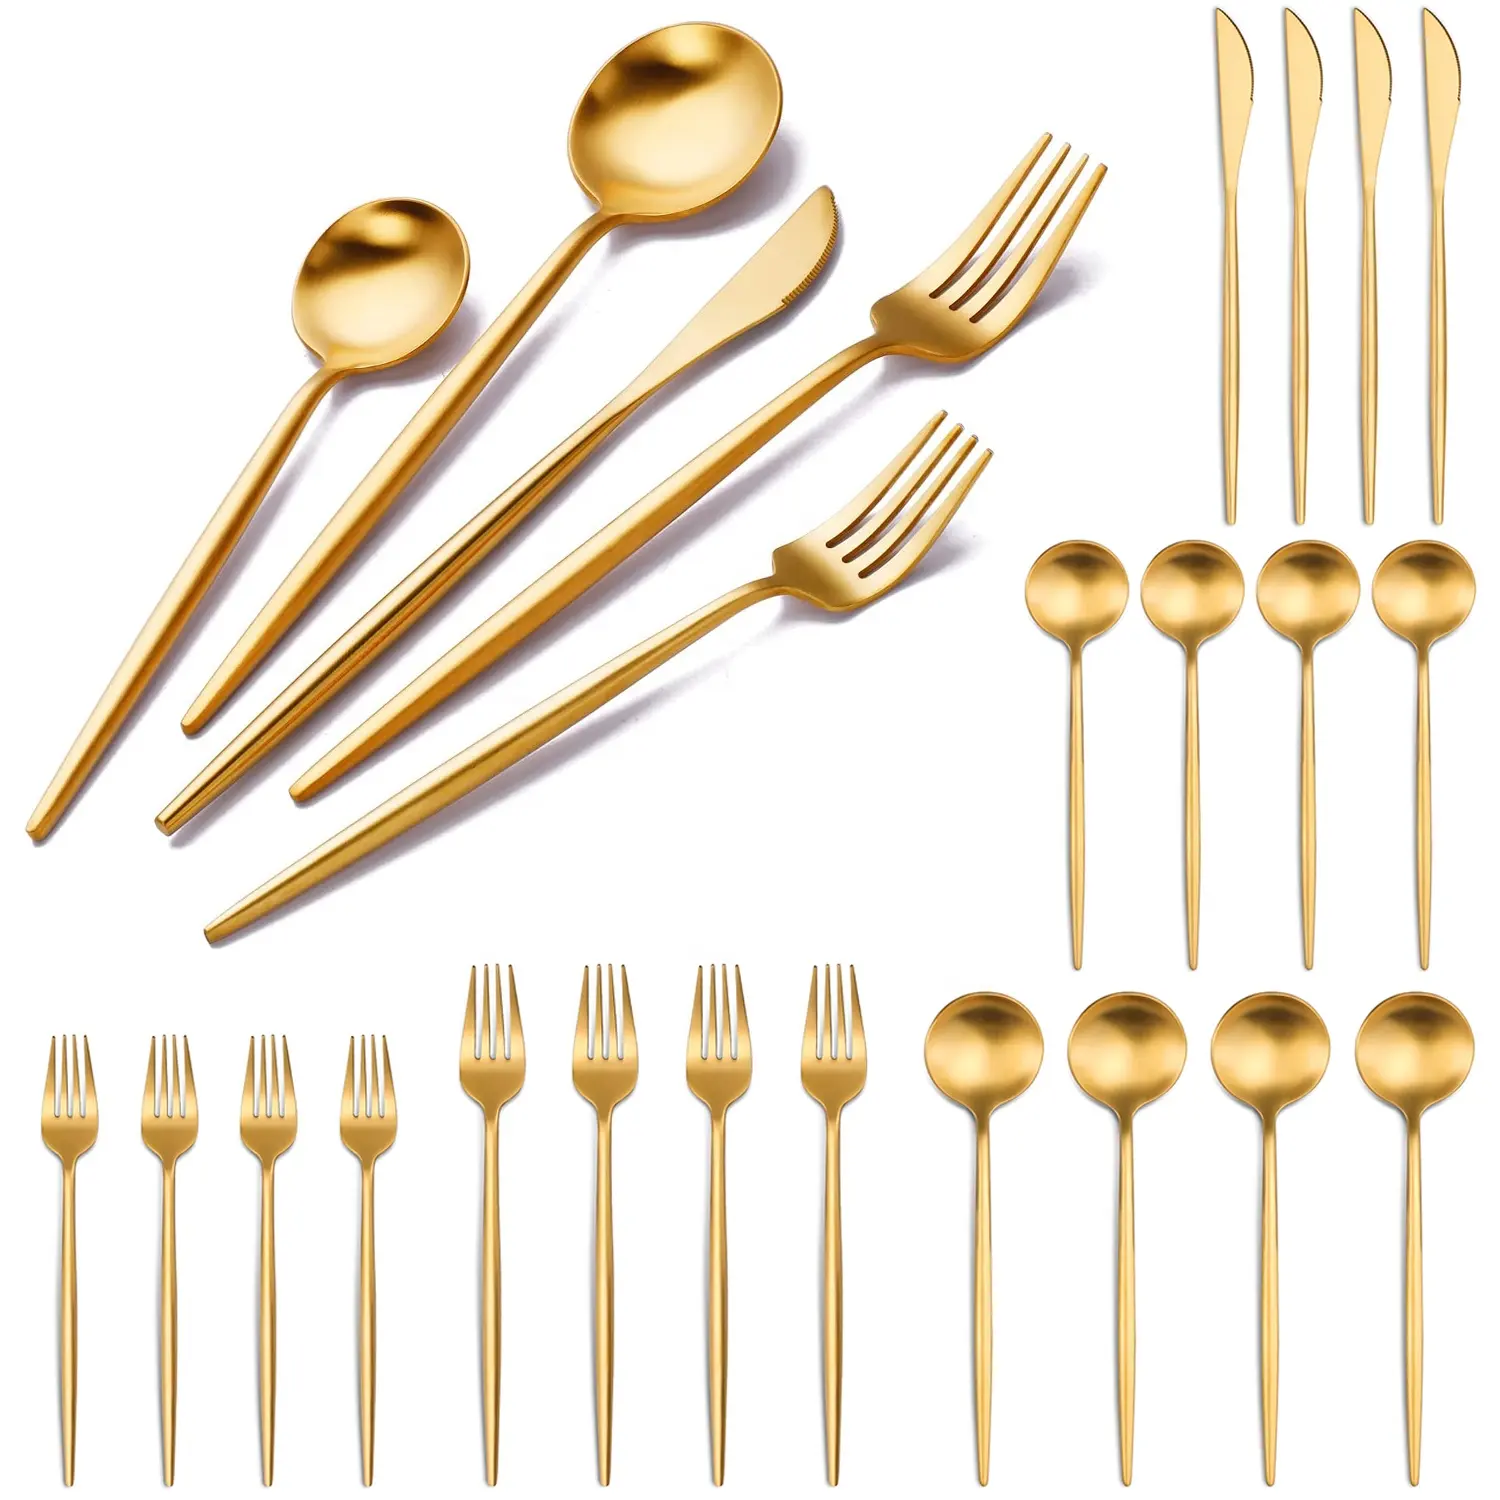 USA STOCK 304 Stainless Steel Metal Golden Plated Bulk Fork Spoon Cutlery Sets Party Event Wedding Flatware Gold Silverware Set